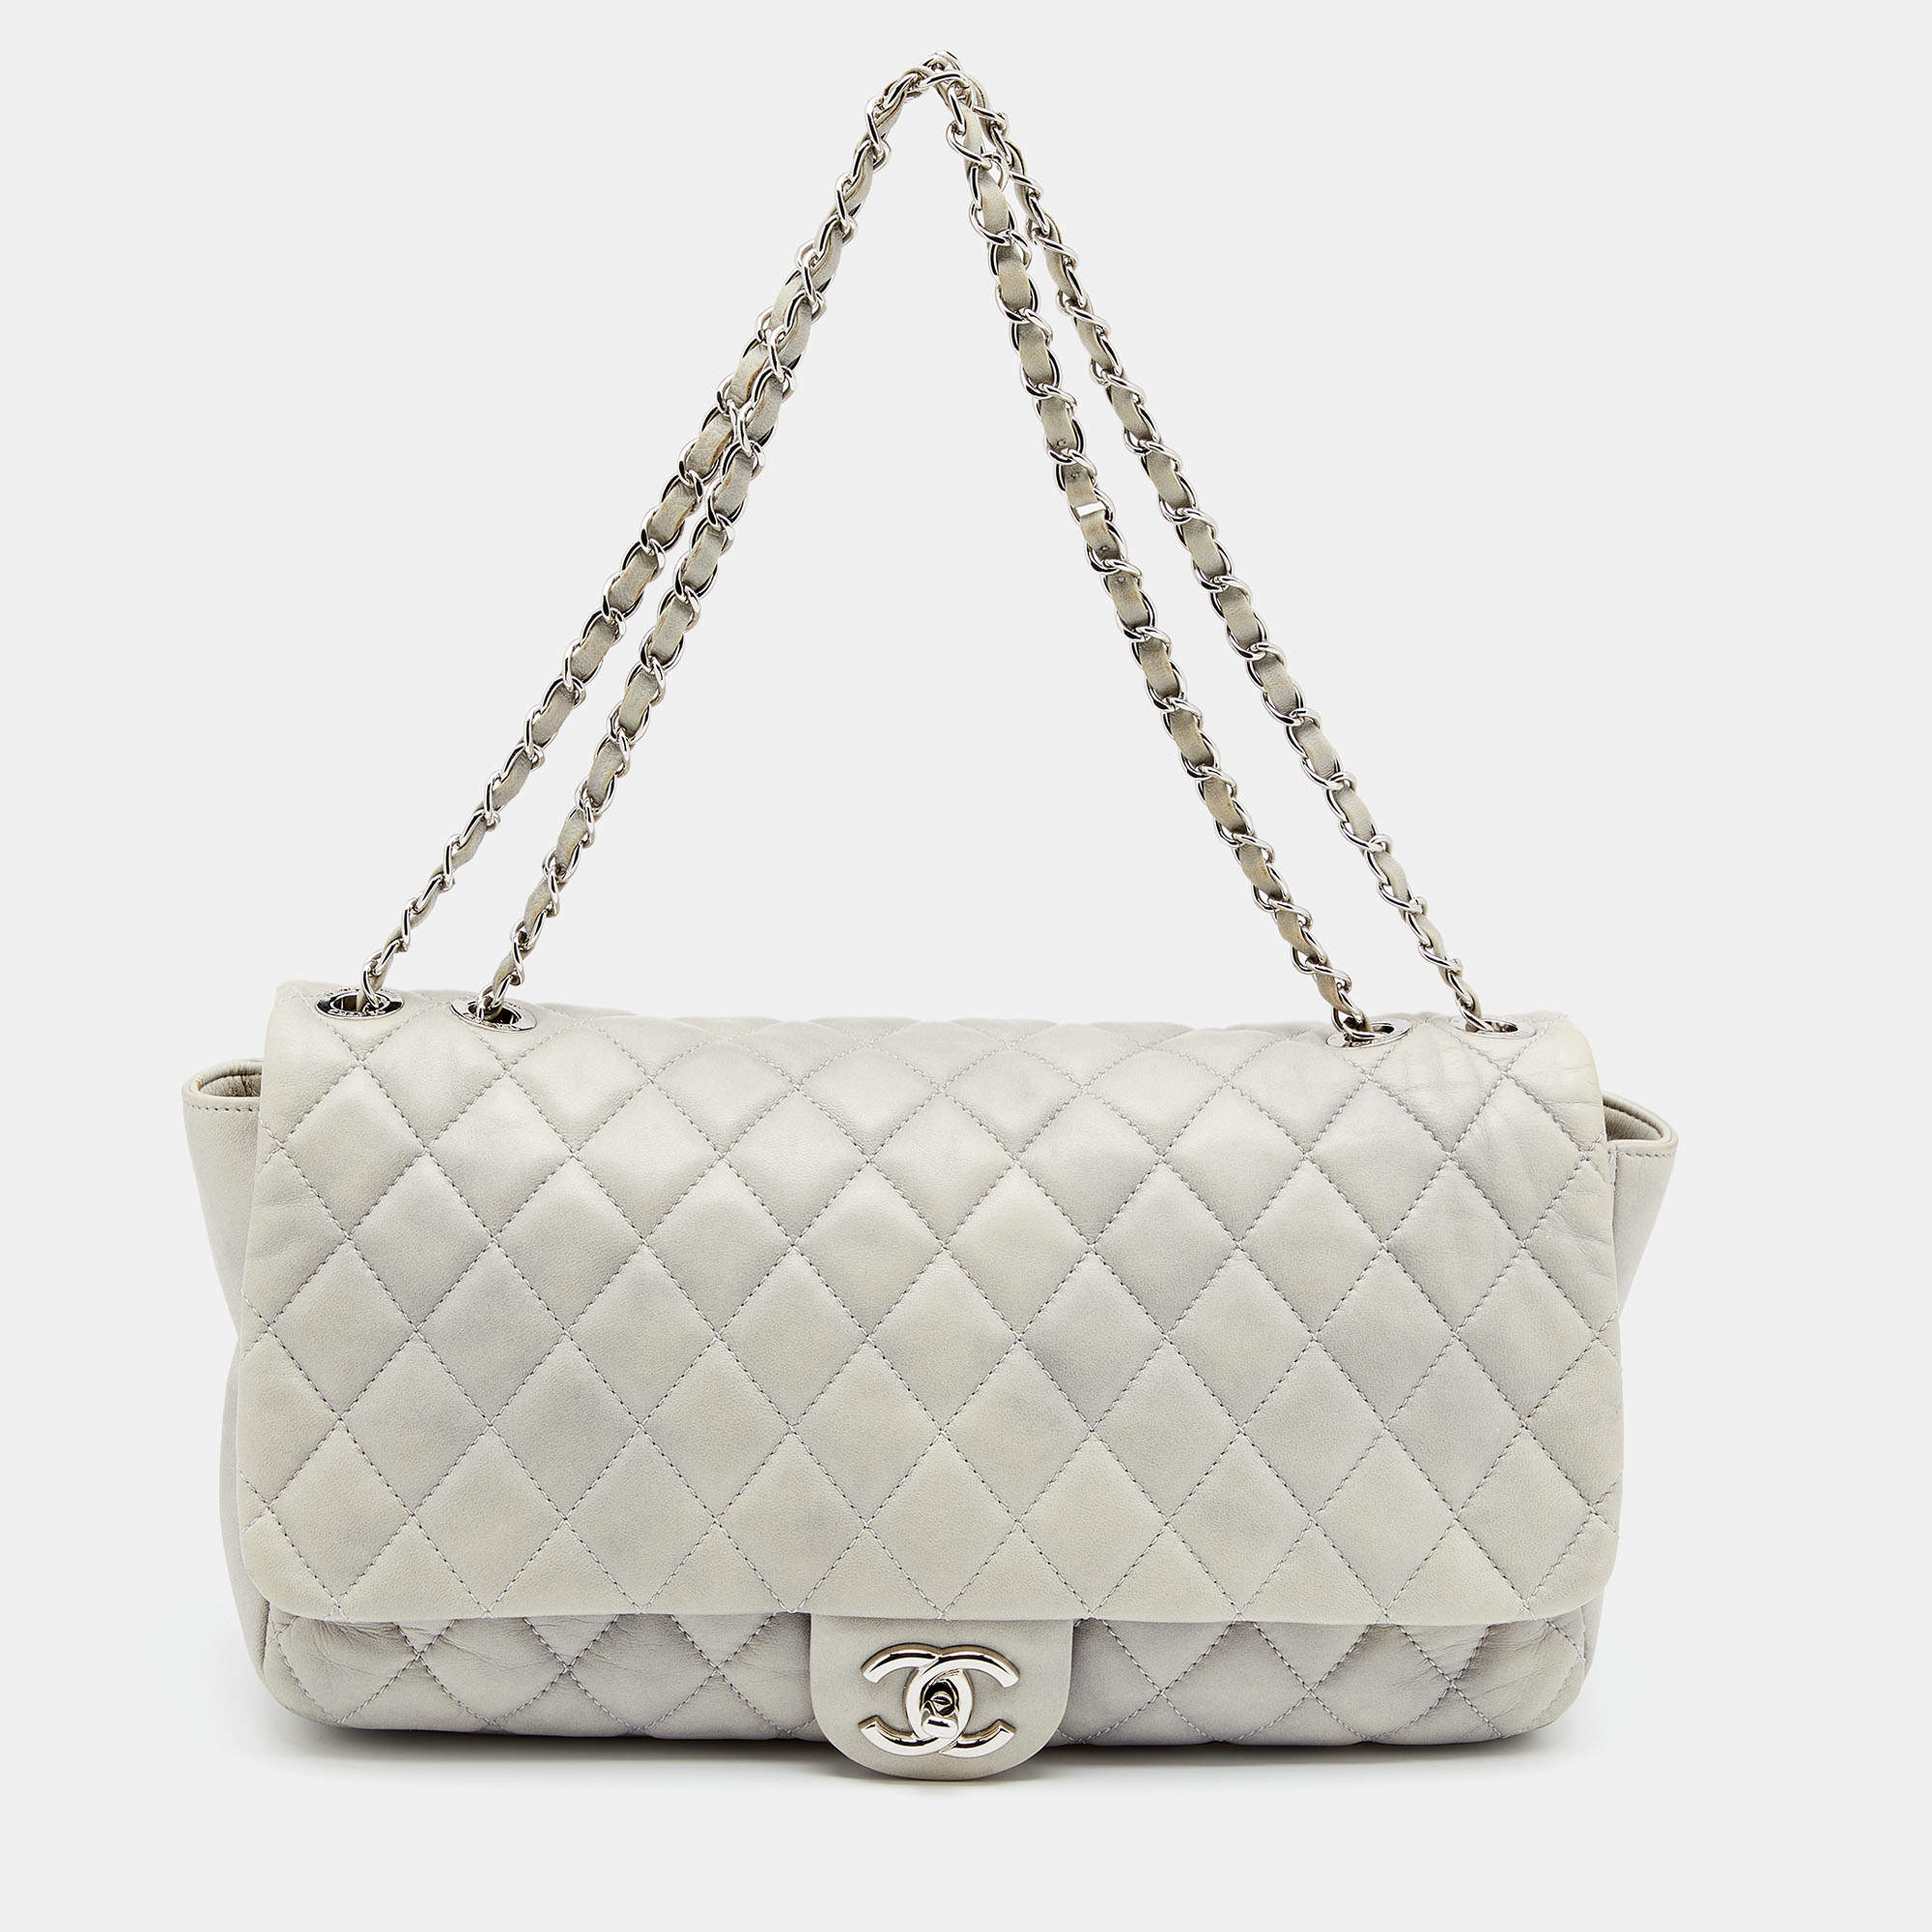 Chanel Grey Quilted Leather Maxi Classic Flap Bag Chanel | The Luxury ...